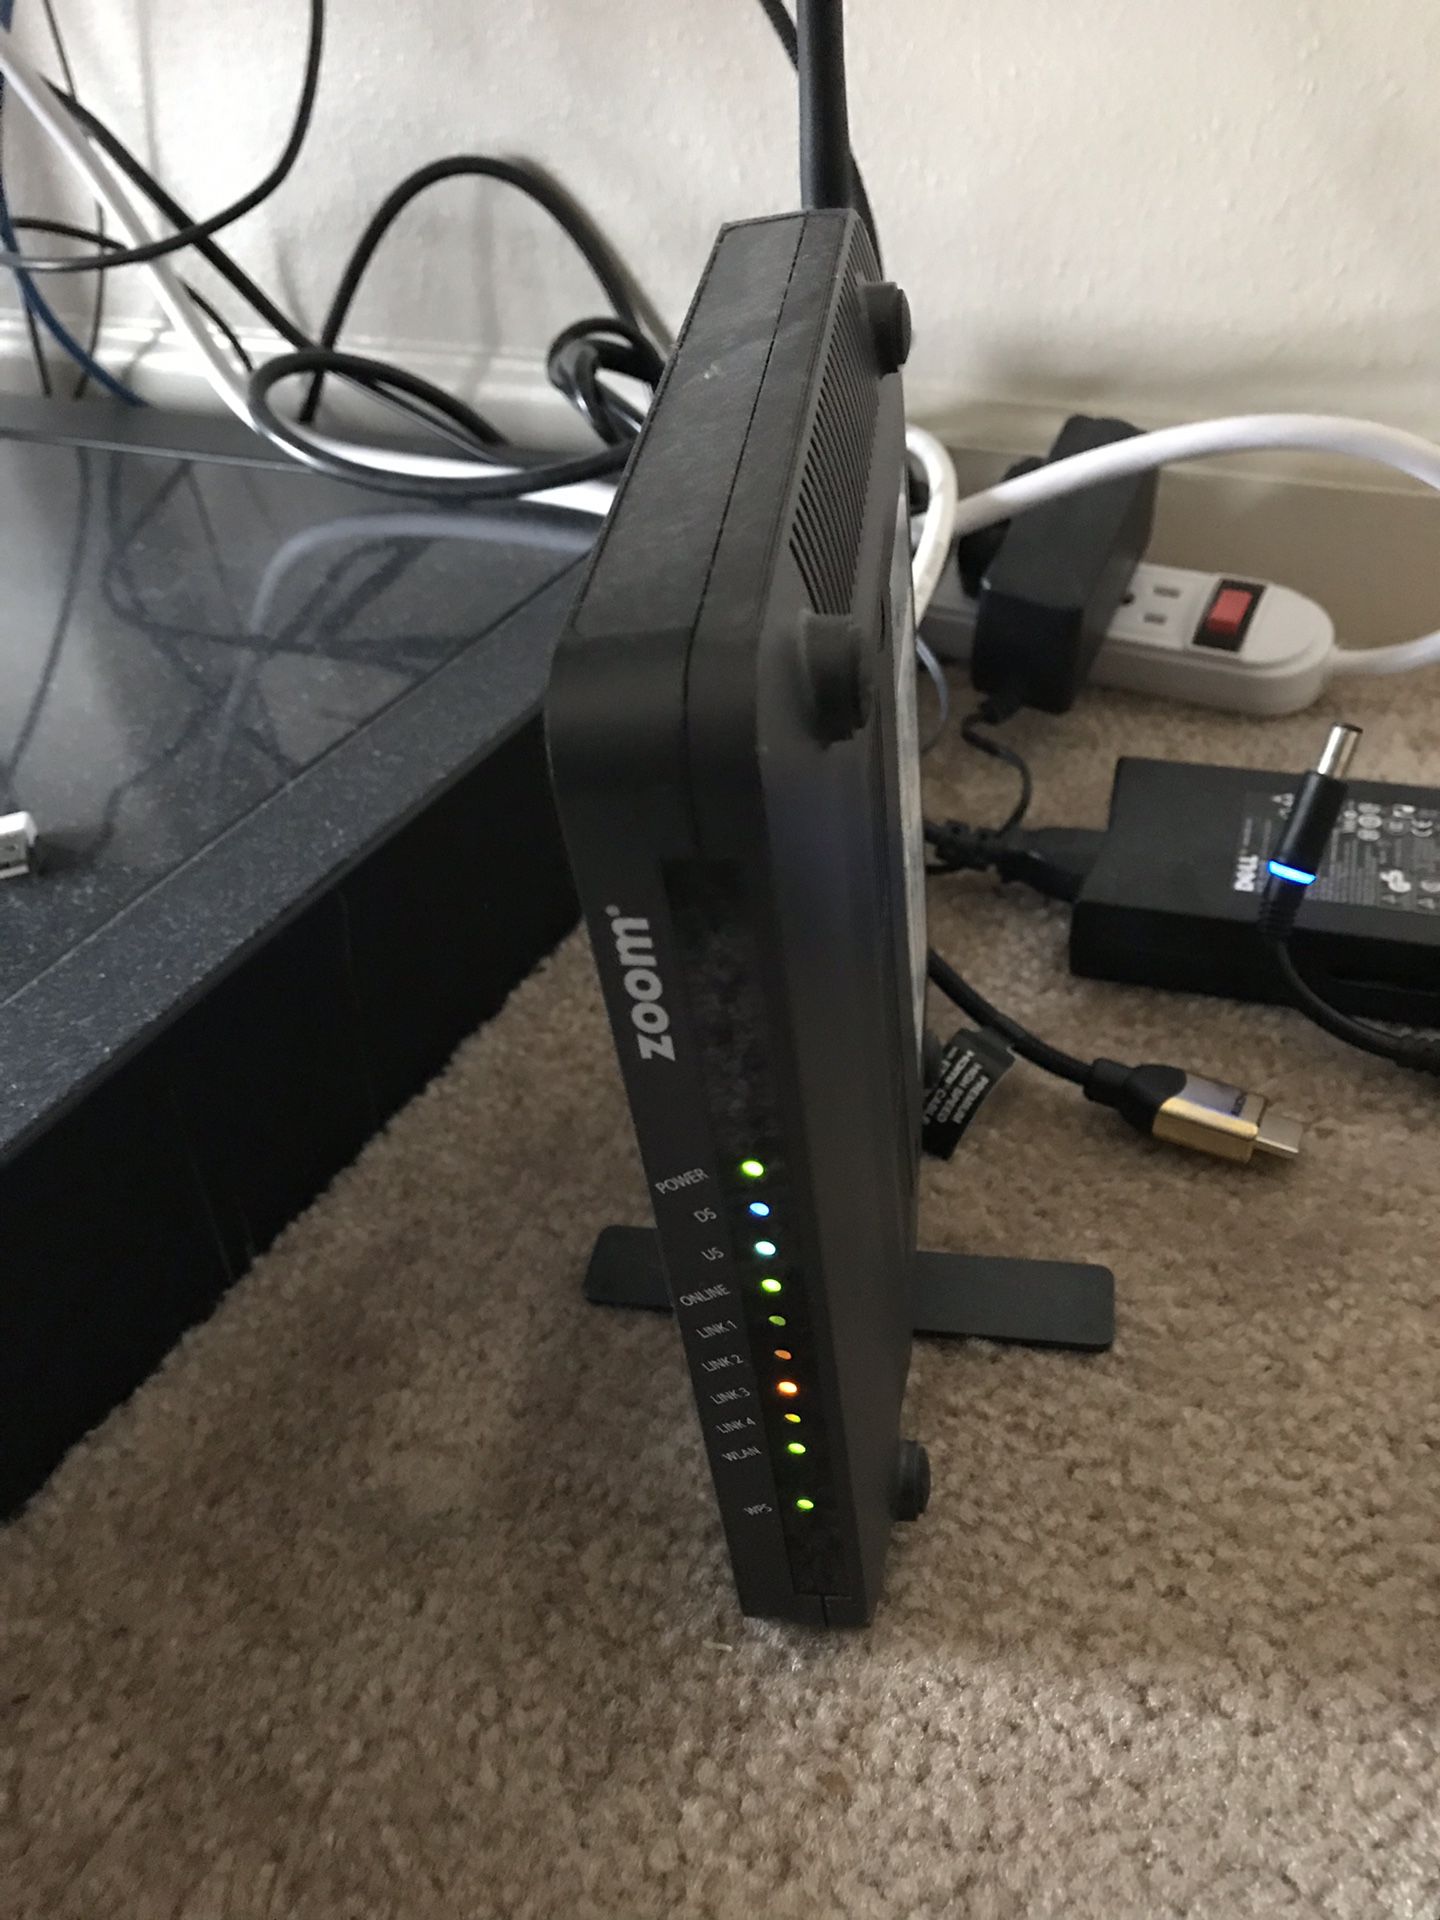 Modem router - Zoom